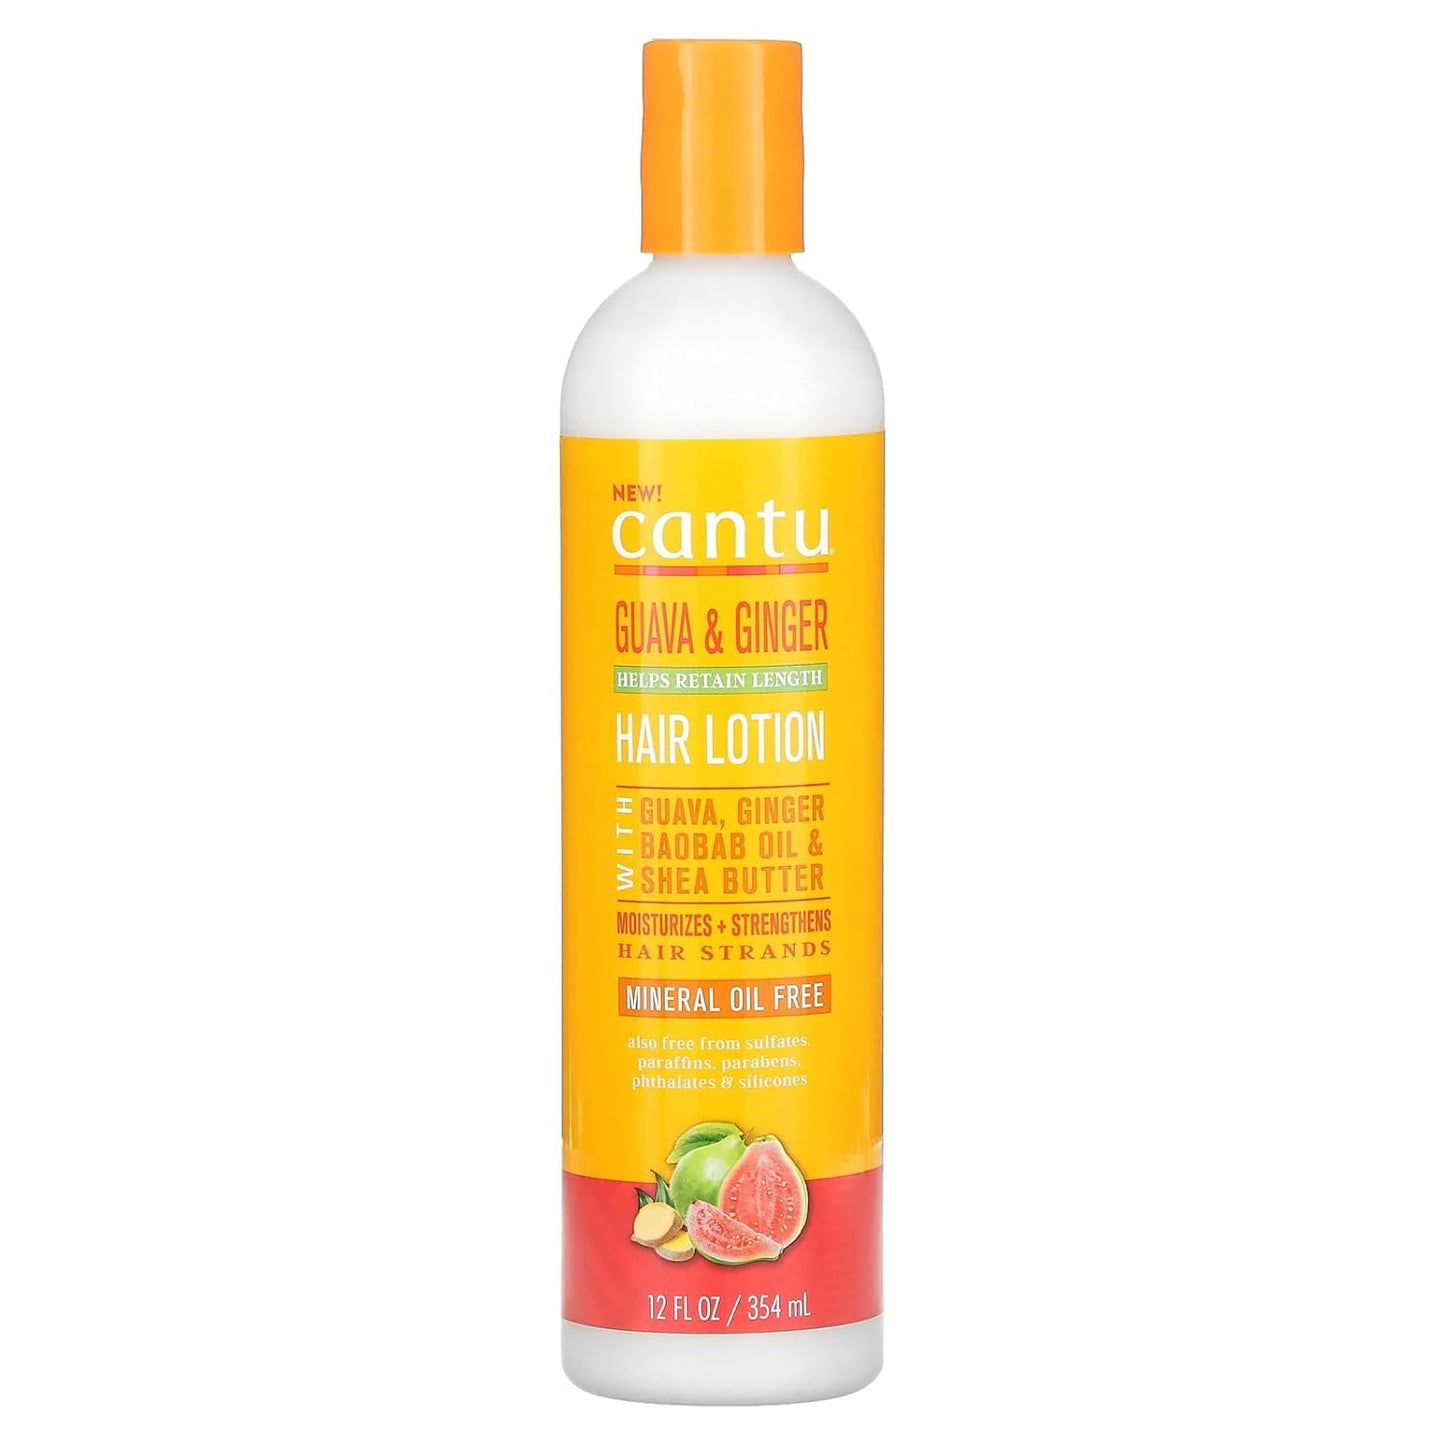 Cantu Guava & Ginger Hair Lotion